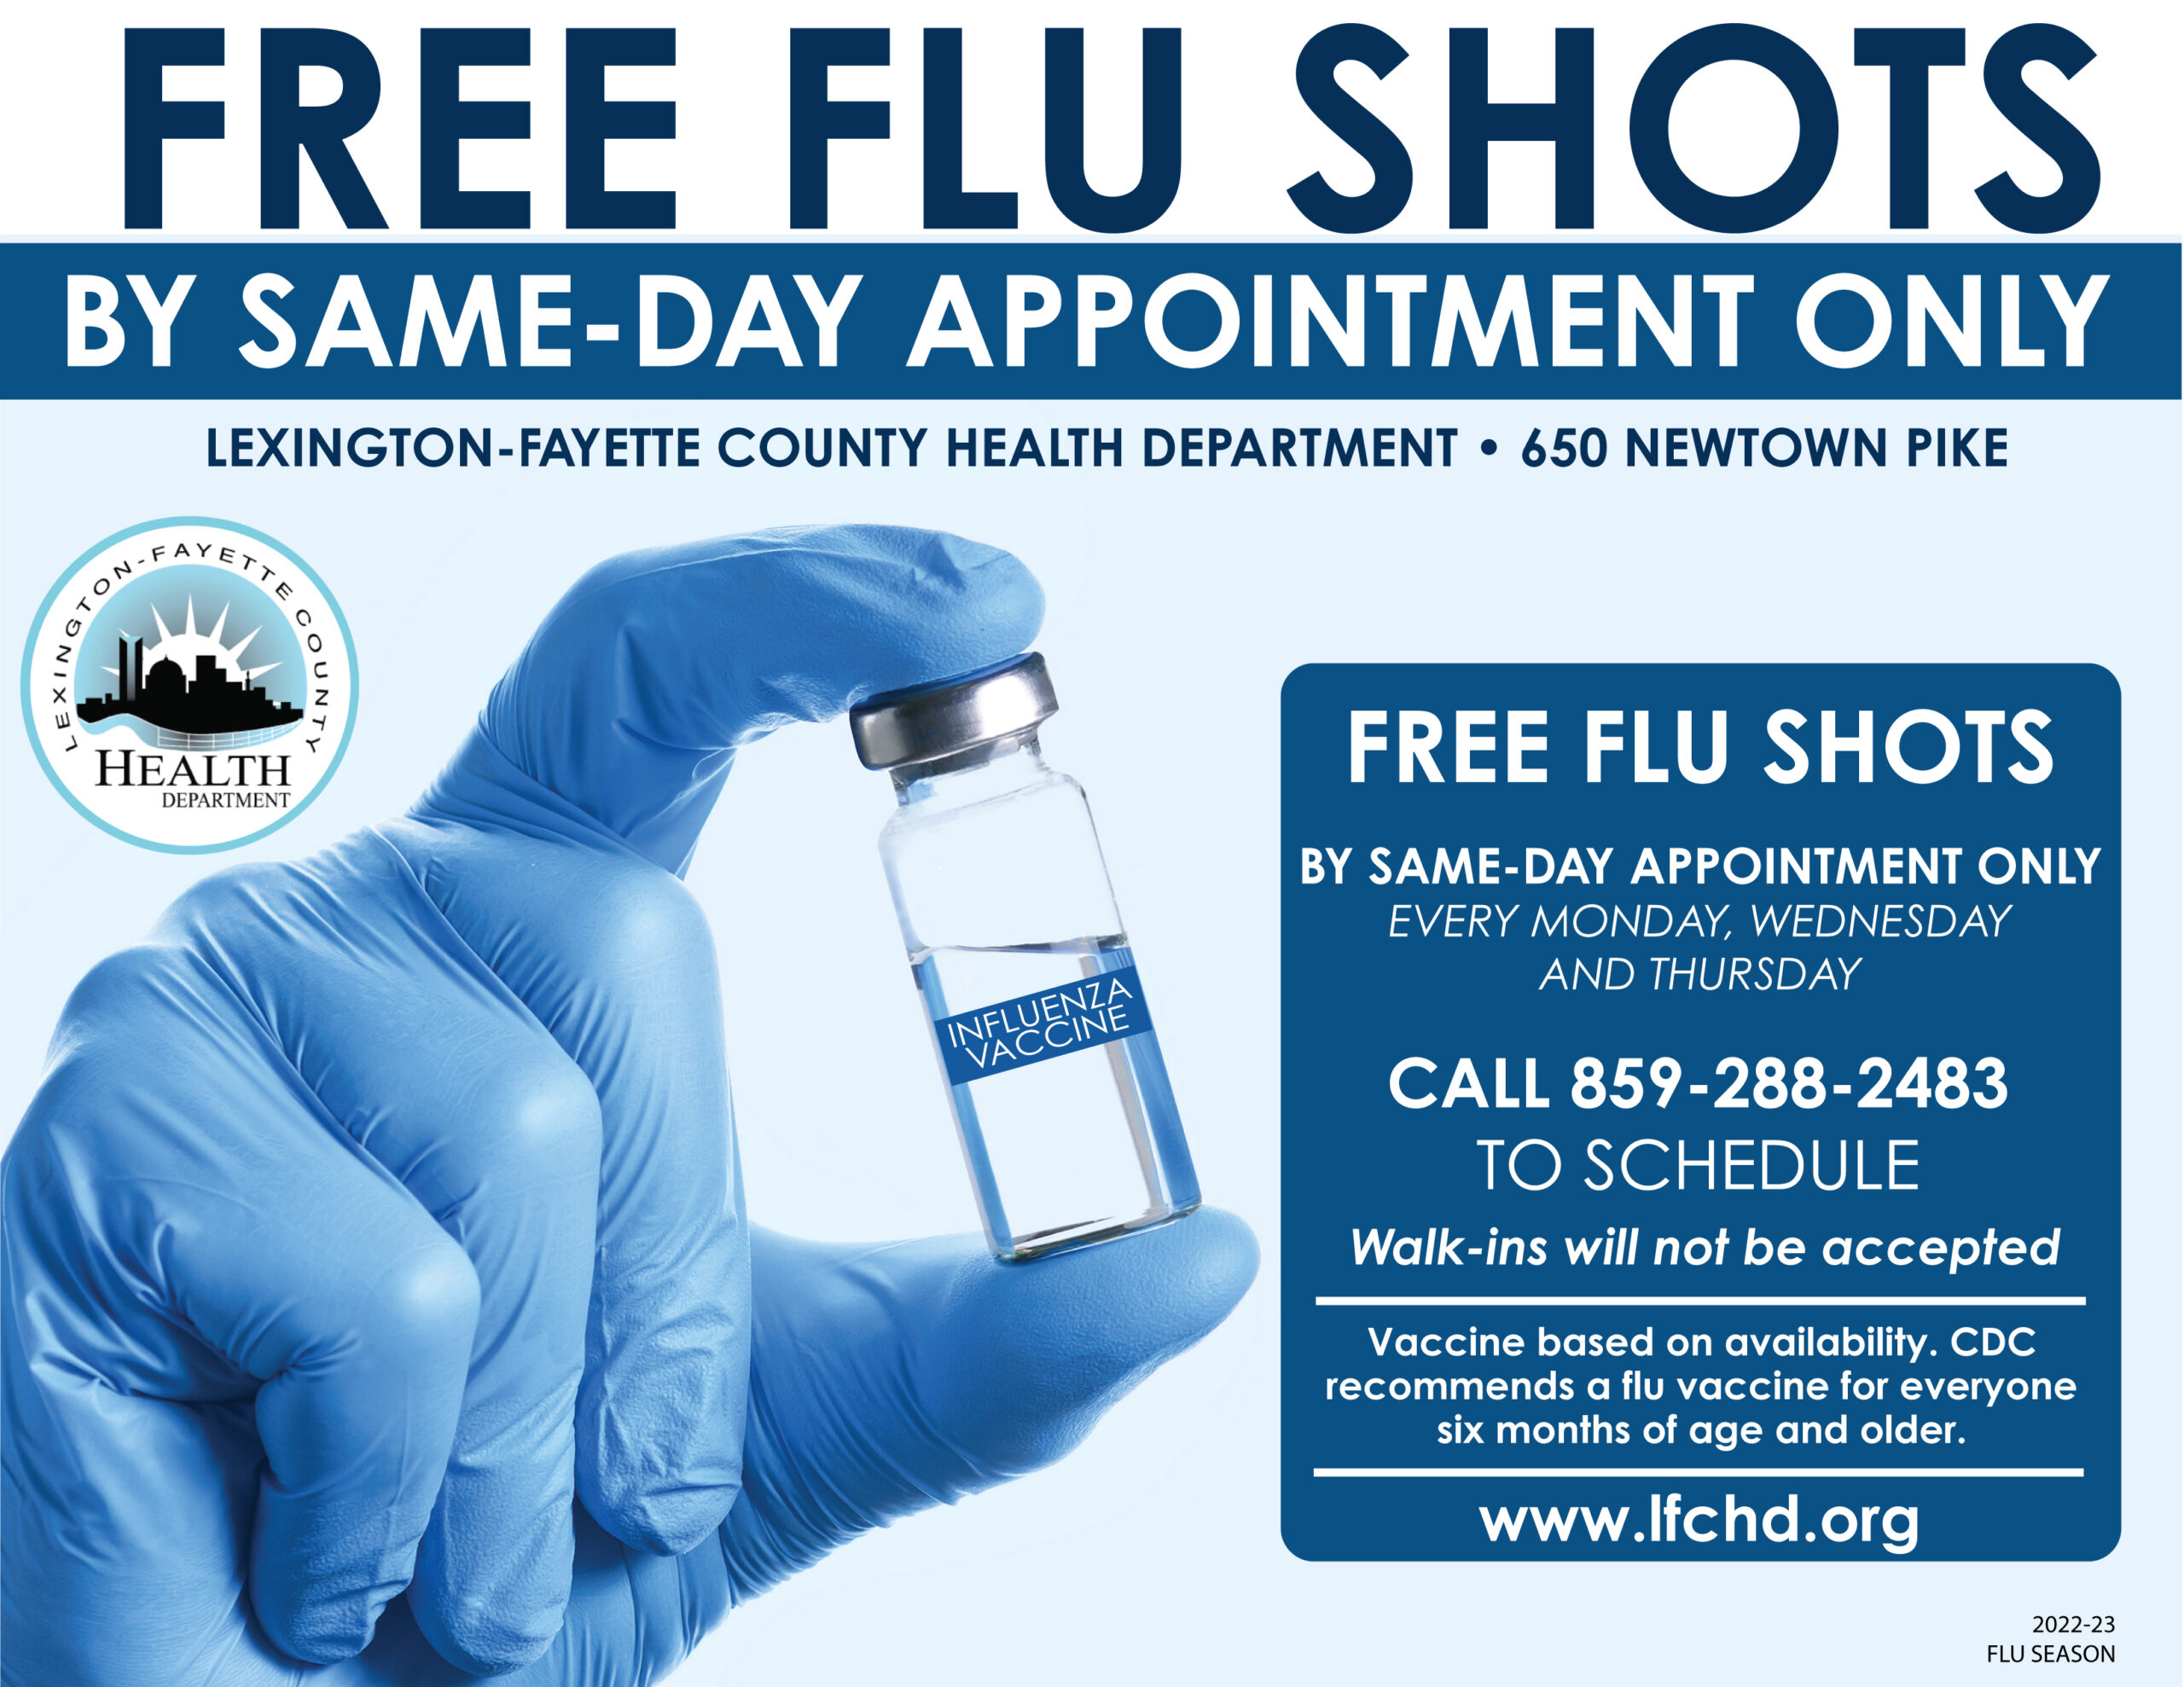 Free flu shots available by sameday appointment in Public Health Clinic